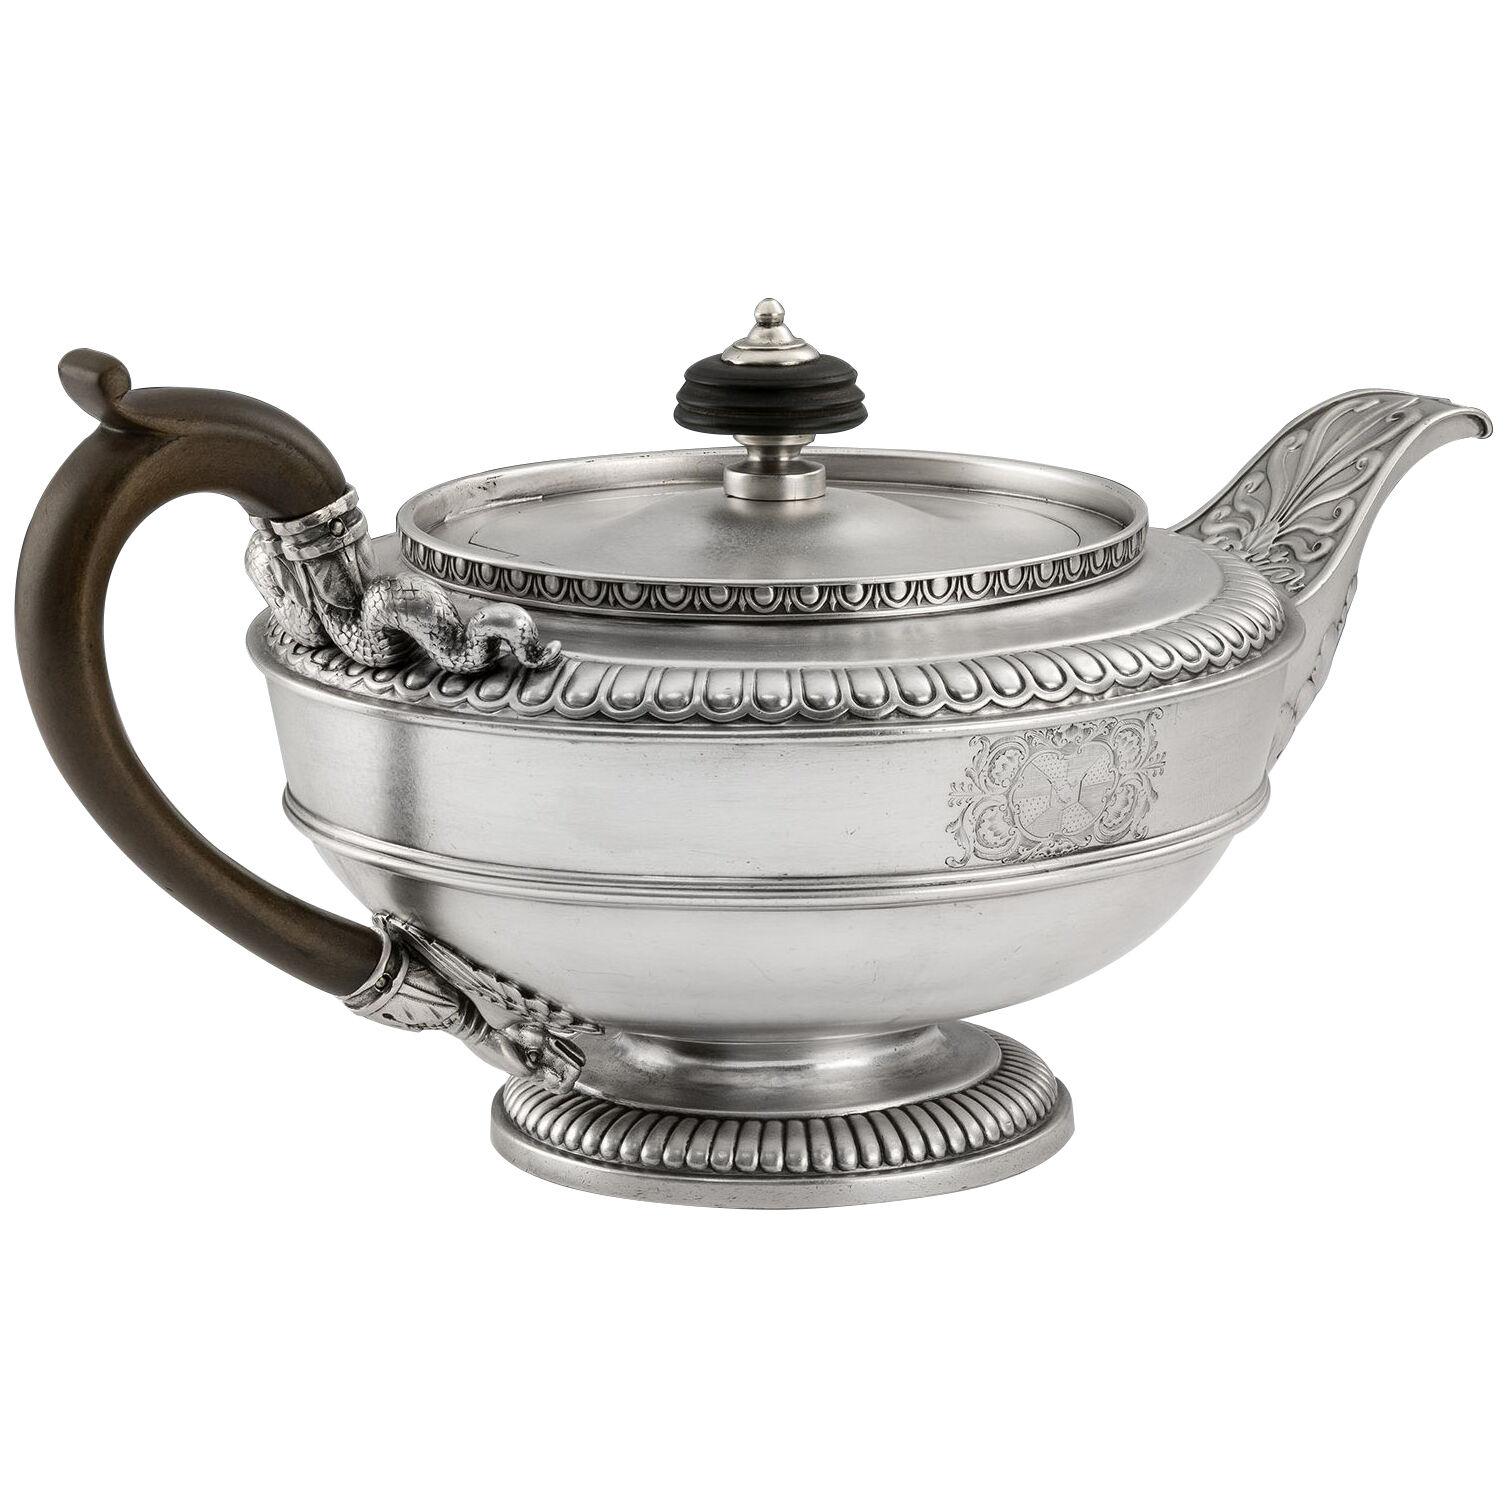 A George III Teapot made in London in1810 by Paul Storr.